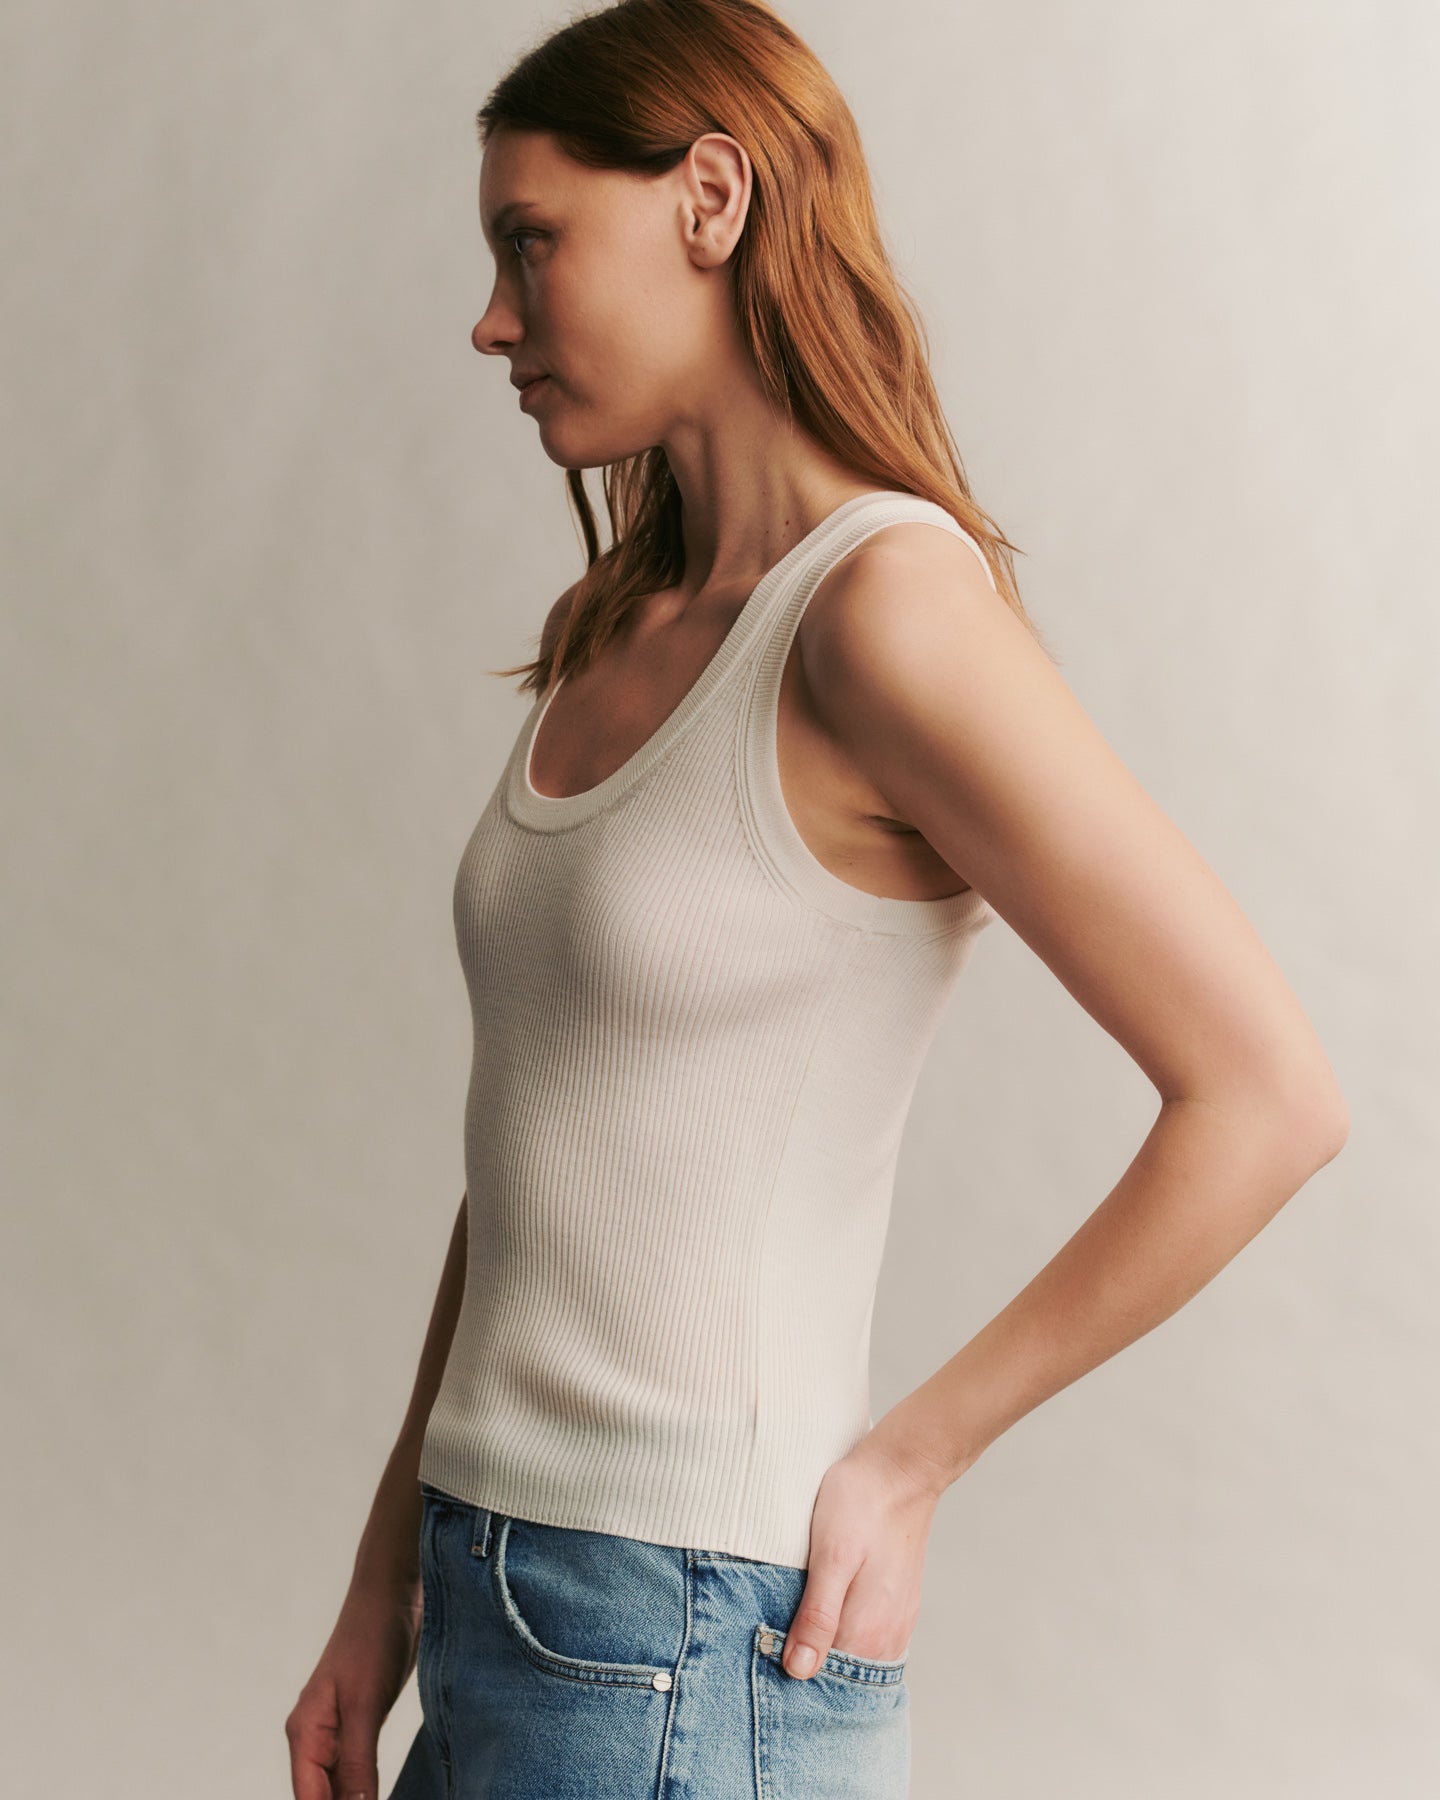 TWP Ivory Knit Tank in wool view 3